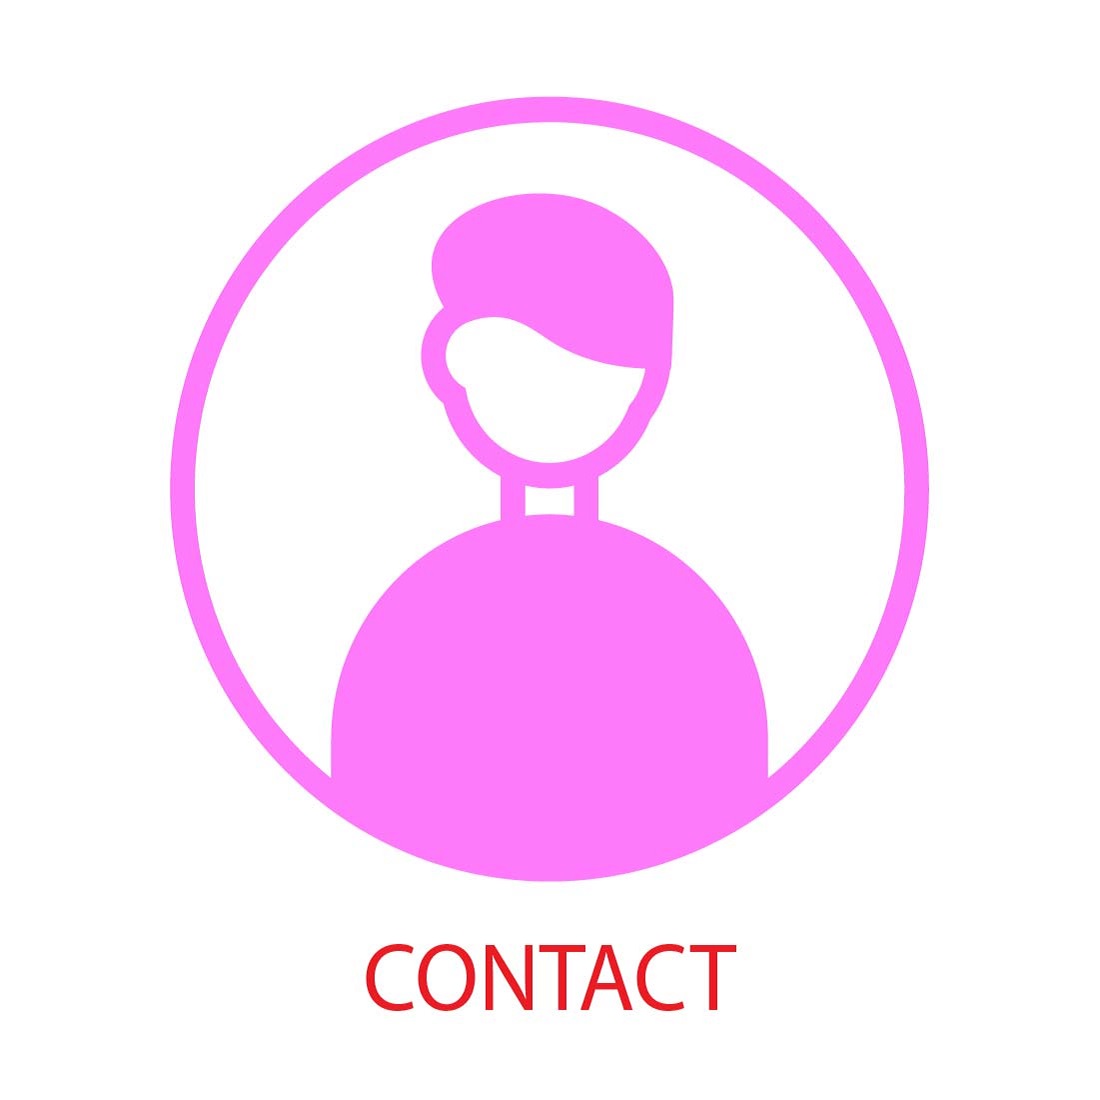 modern contact icon set editabol and ricbale 03 945